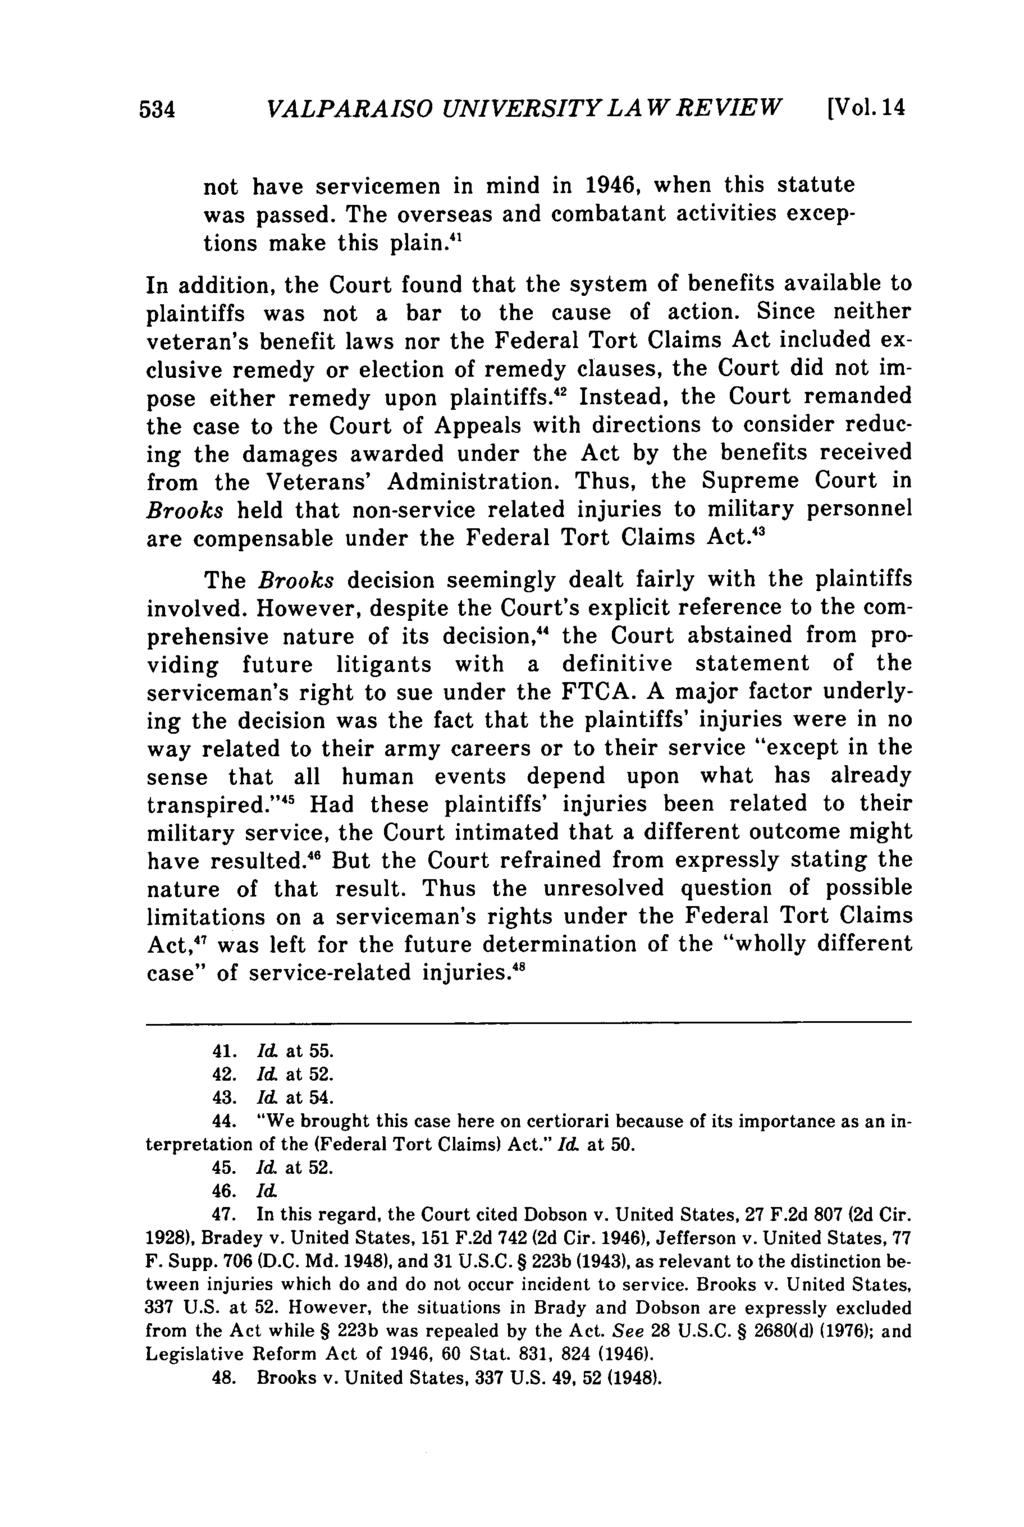 Valparaiso University Law Review, Vol. 14, No. 3 [1980], Art. 5 534 VALPARAISO UNIVERSITY LAW REVIEW [Vol.14 not have servicemen in mind in 1946, when this statute was passed.